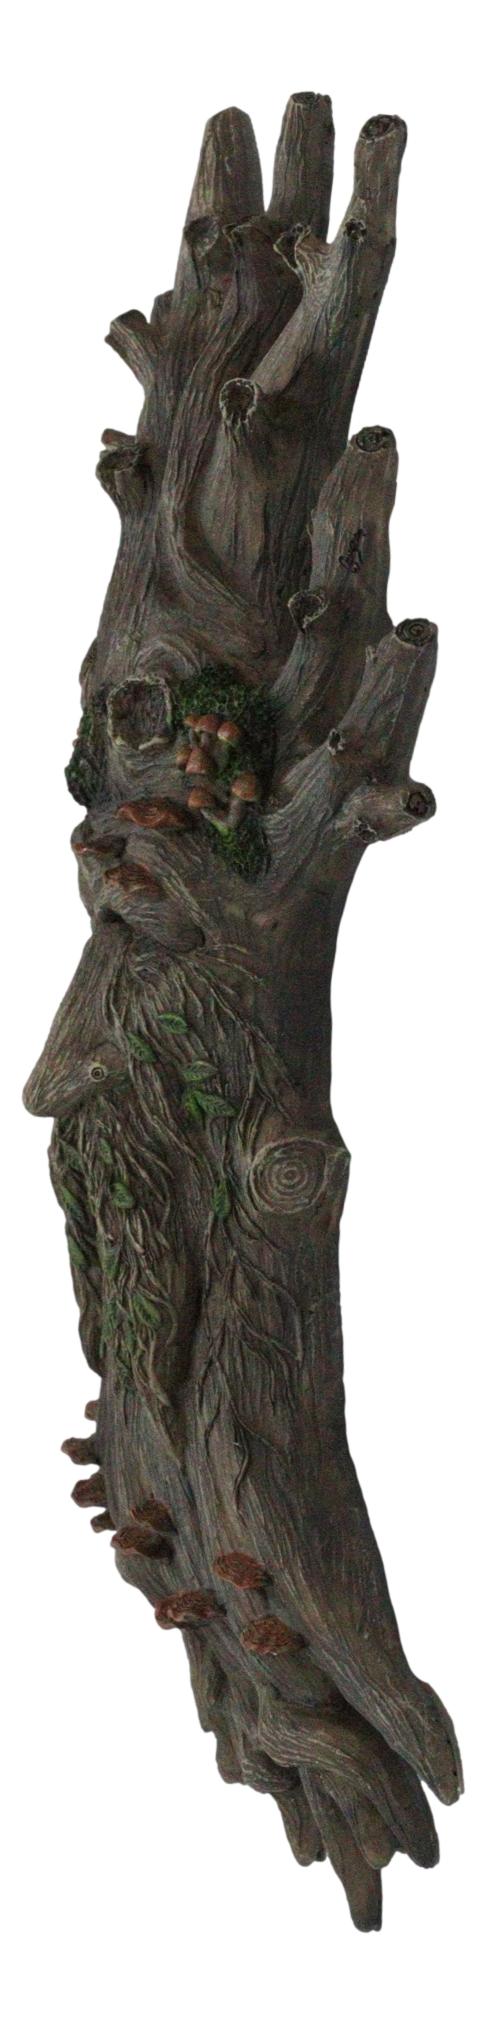 Wiccan Celtic Tree Ent Greenman Tree Man With Bracket Fungi Wall Decor Plaque